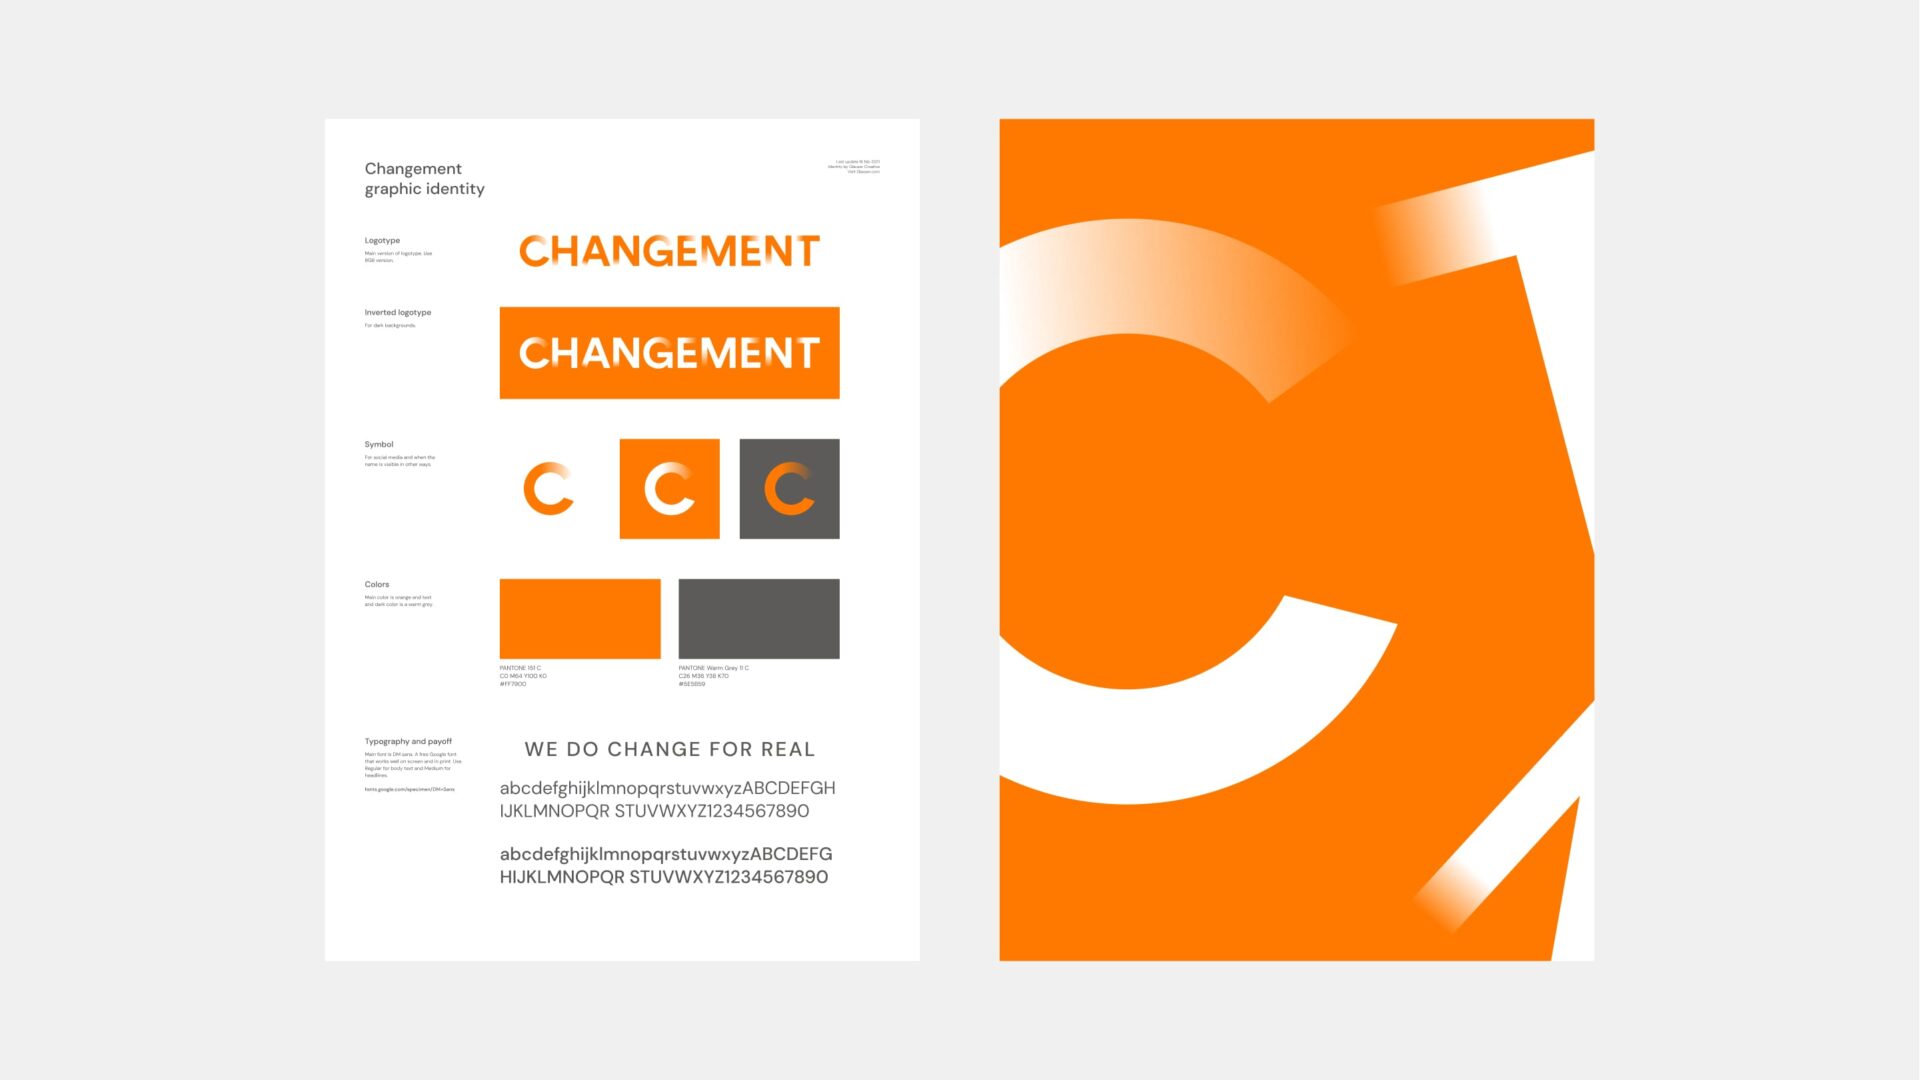 Logotype and application of the Changement graphic identity